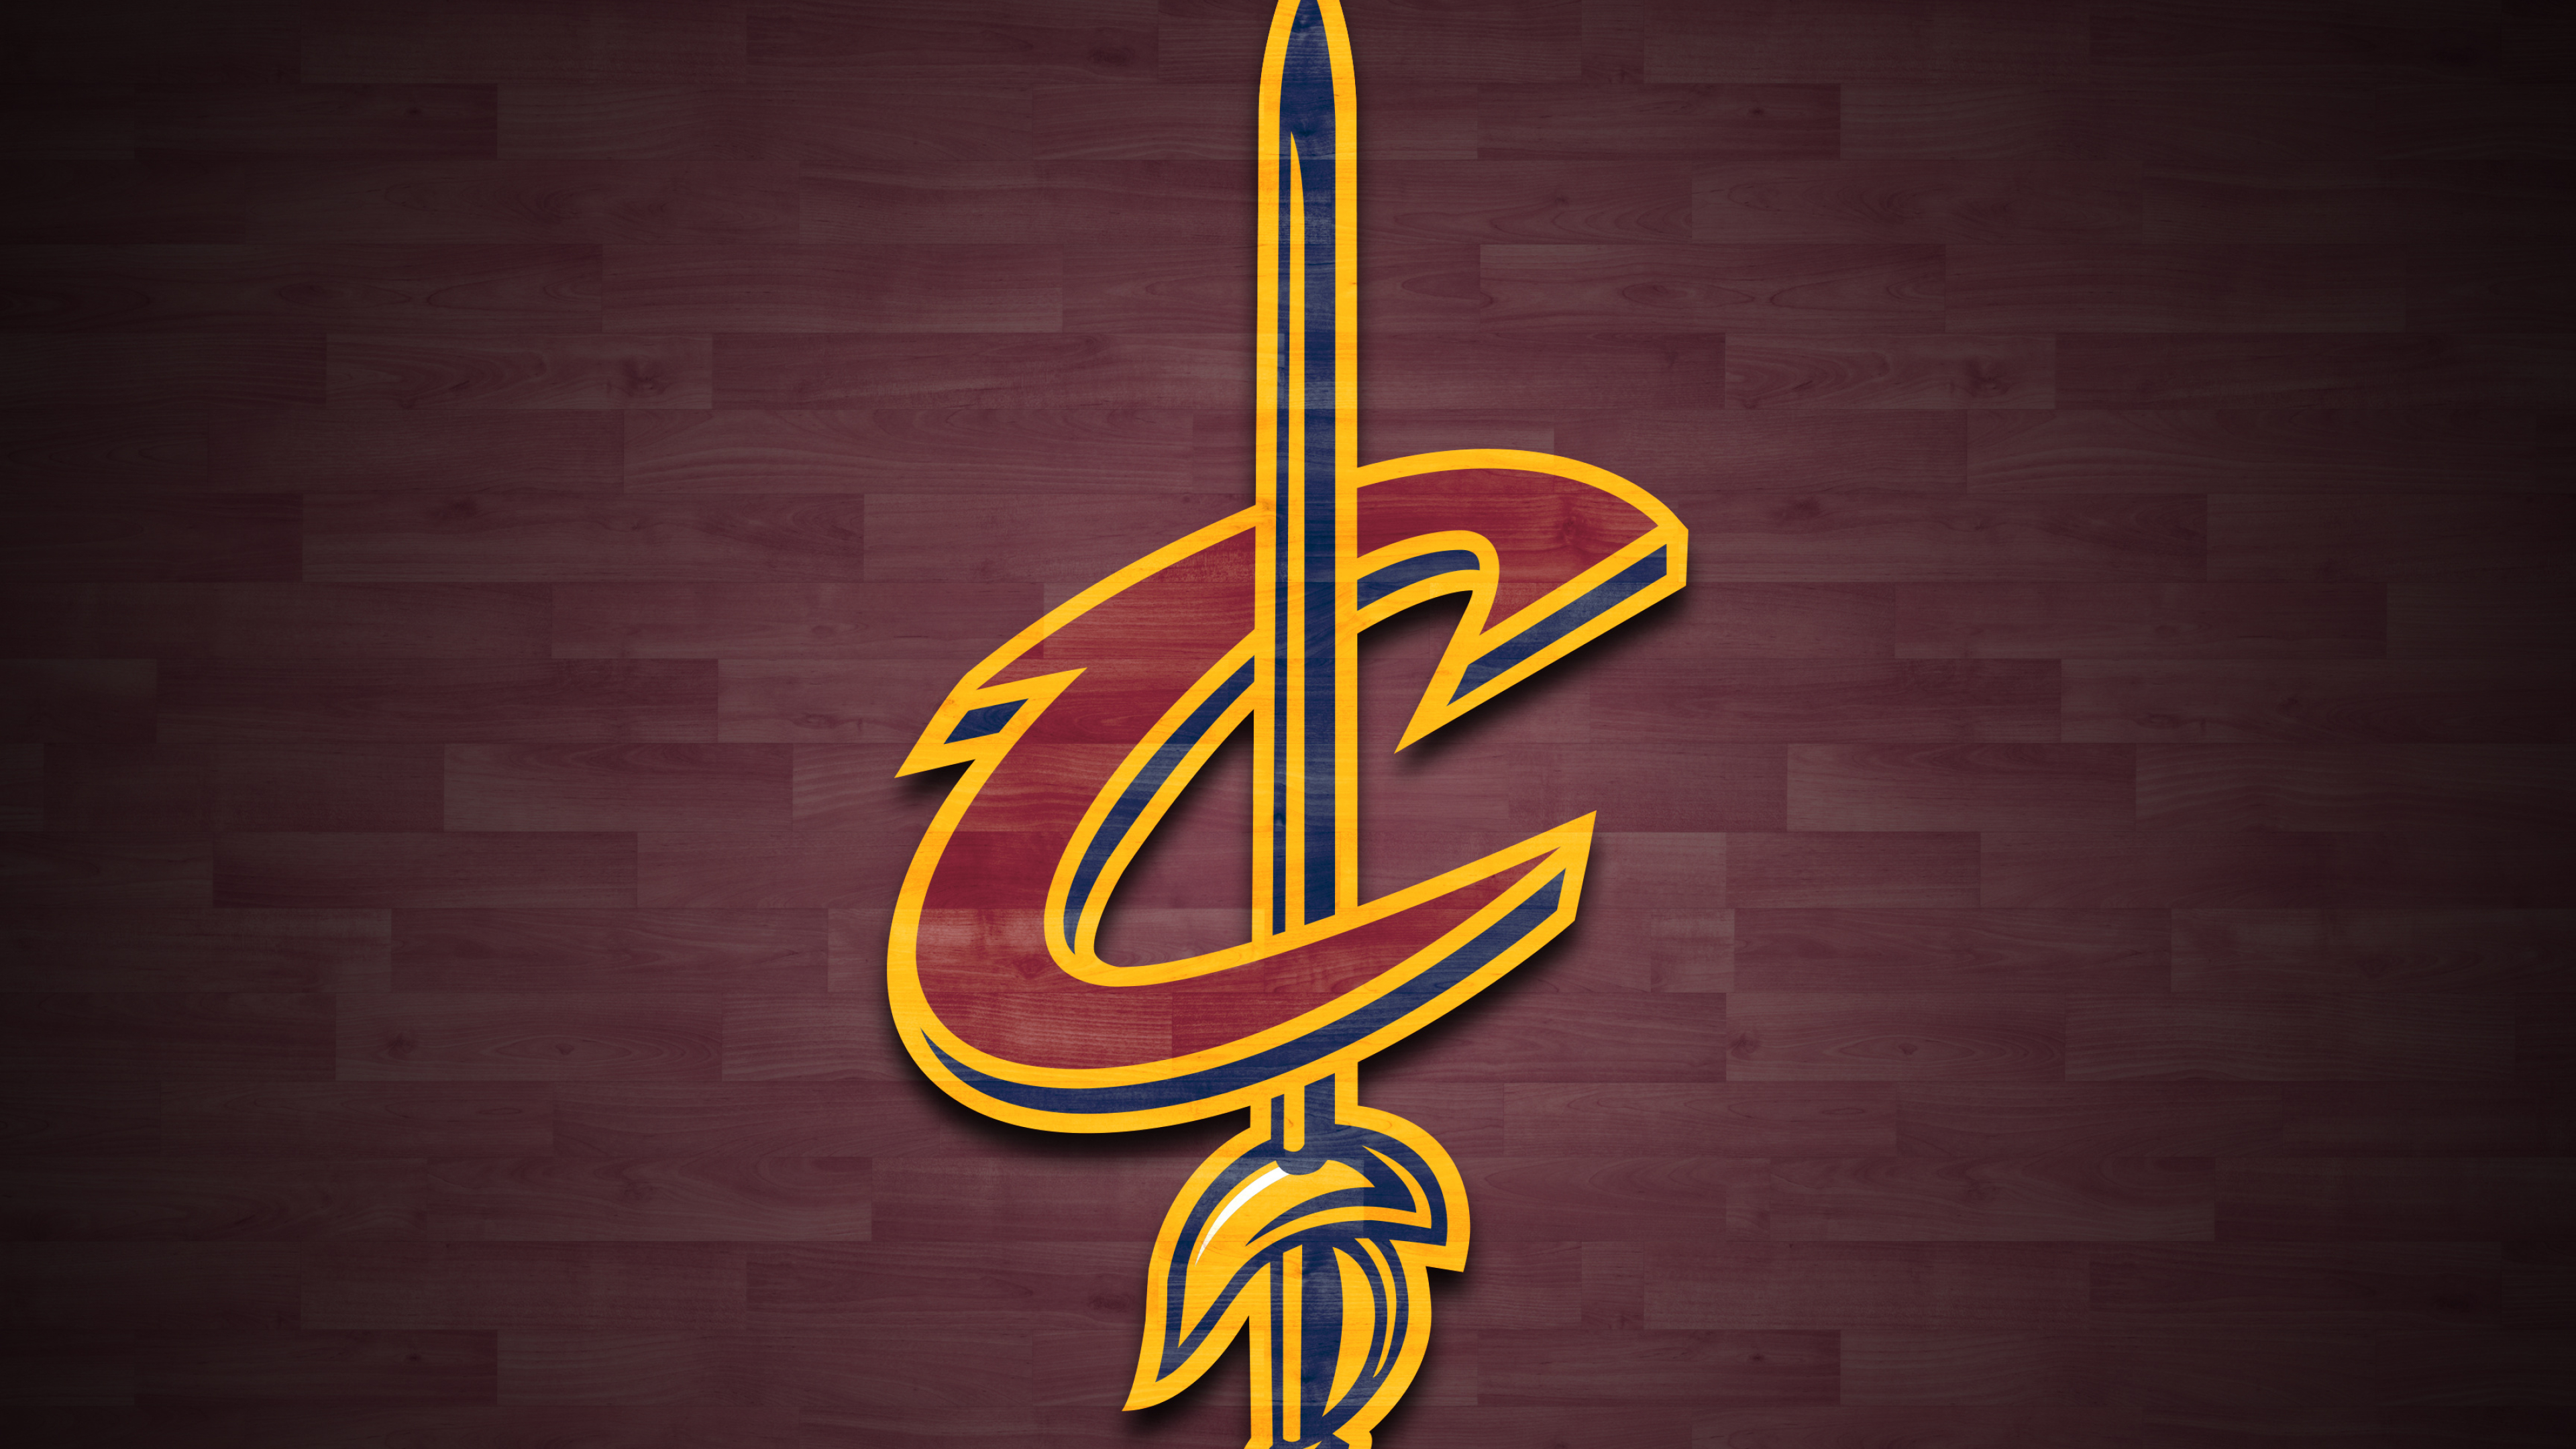 Cleveland Cavaliers: A member of the NBA's Eastern Conference Central Division. 3840x2160 4K Background.